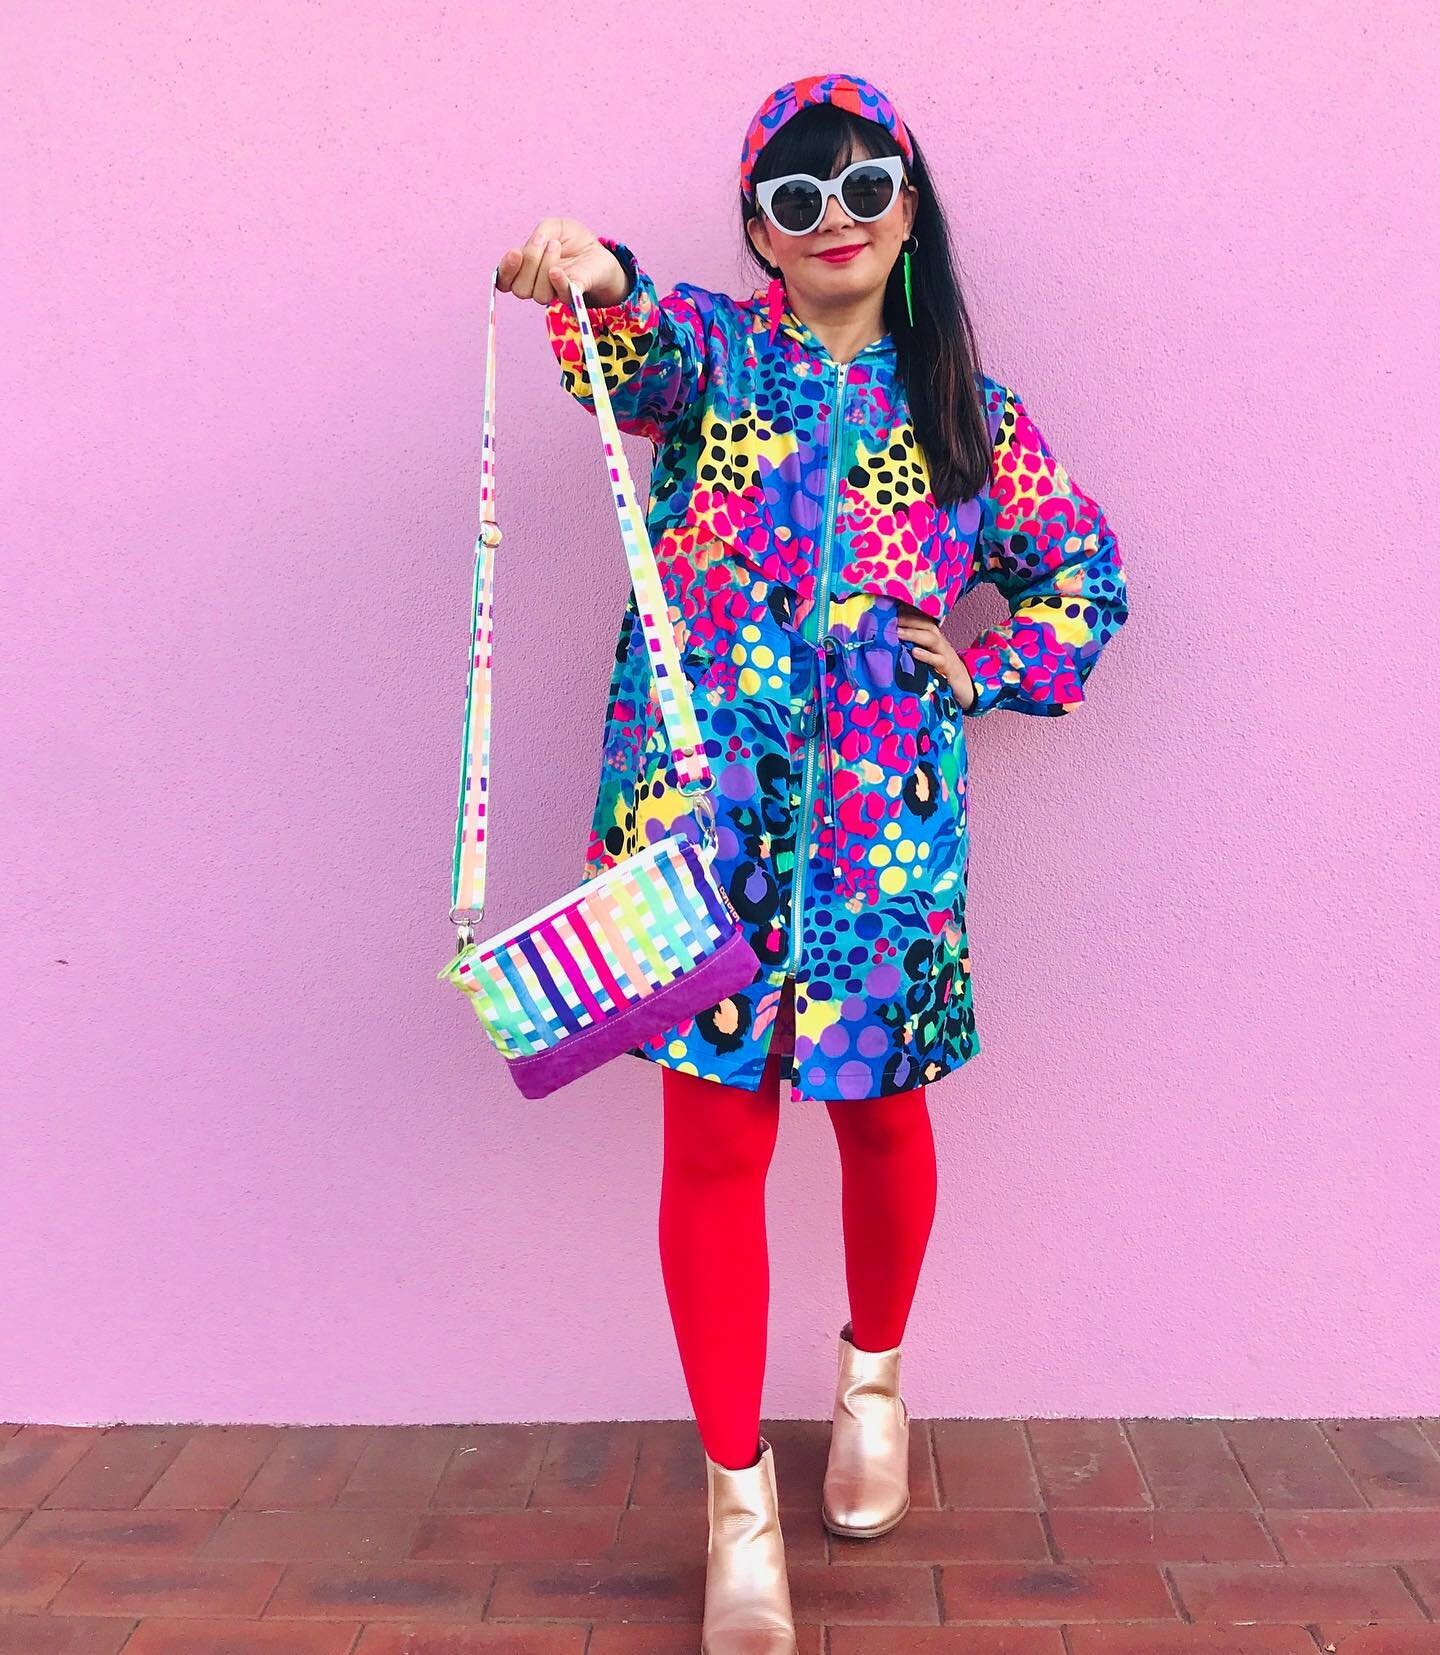 Taking a moment to appreciate this look by rainbow in human form @keanujess and her @lalalea.makes bag in my neon rainbow print! 🌈💕

[ID: Jess stands in front of a pink wall holding a colourful bag! She&rsquo;s wearing bright red tights and a coulo